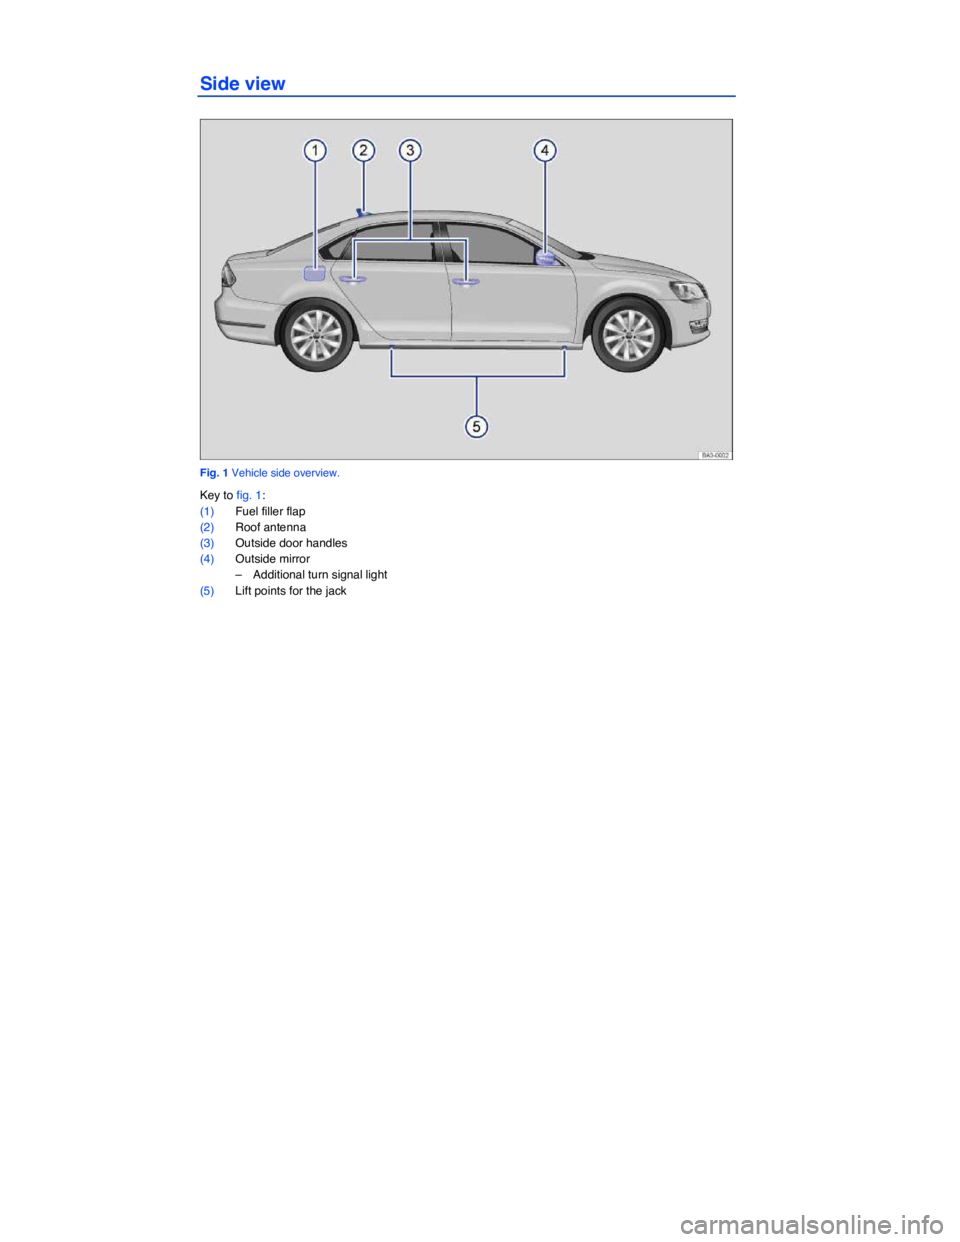 VOLKSWAGEN PASSAT 2009  Owners Manual  
Side view 
 
Fig. 1 Vehicle side overview. 
Key to fig. 1: 
(1) Fuel filler flap  
(2) Roof antenna  
(3) Outside door handles  
(4) Outside mirror  
–  Additional turn signal light  
(5) Lift poi